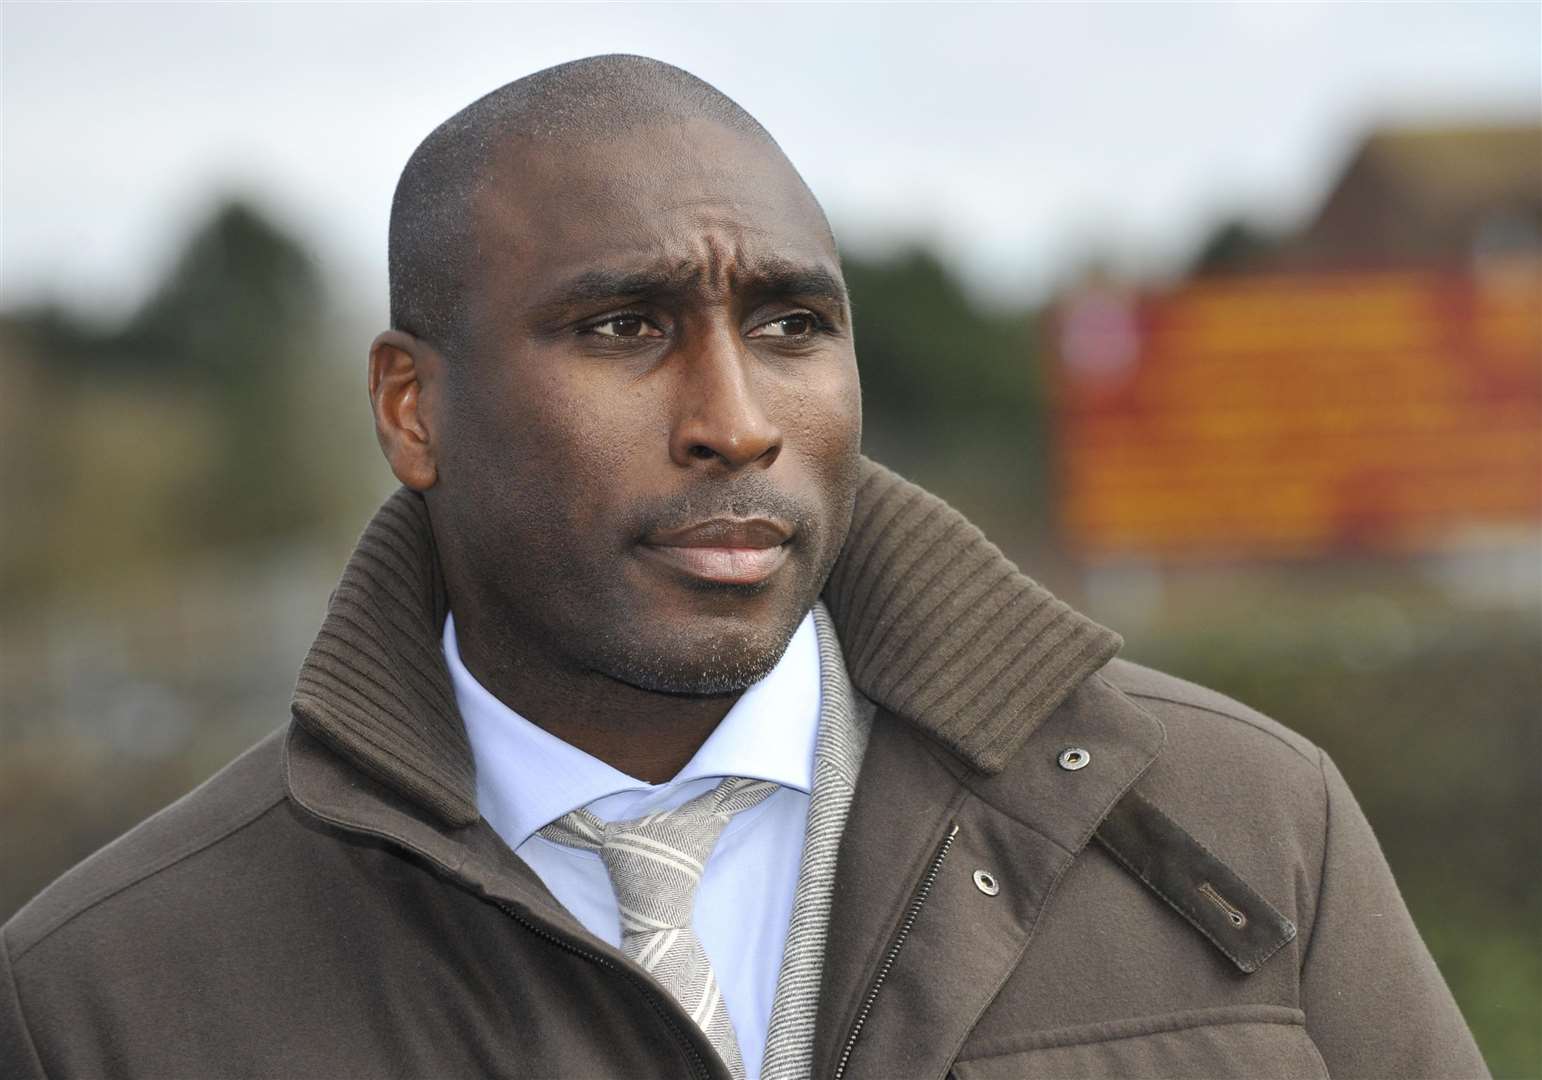 Football fans reportedly sang racist songs about former England defender Sol Campbell